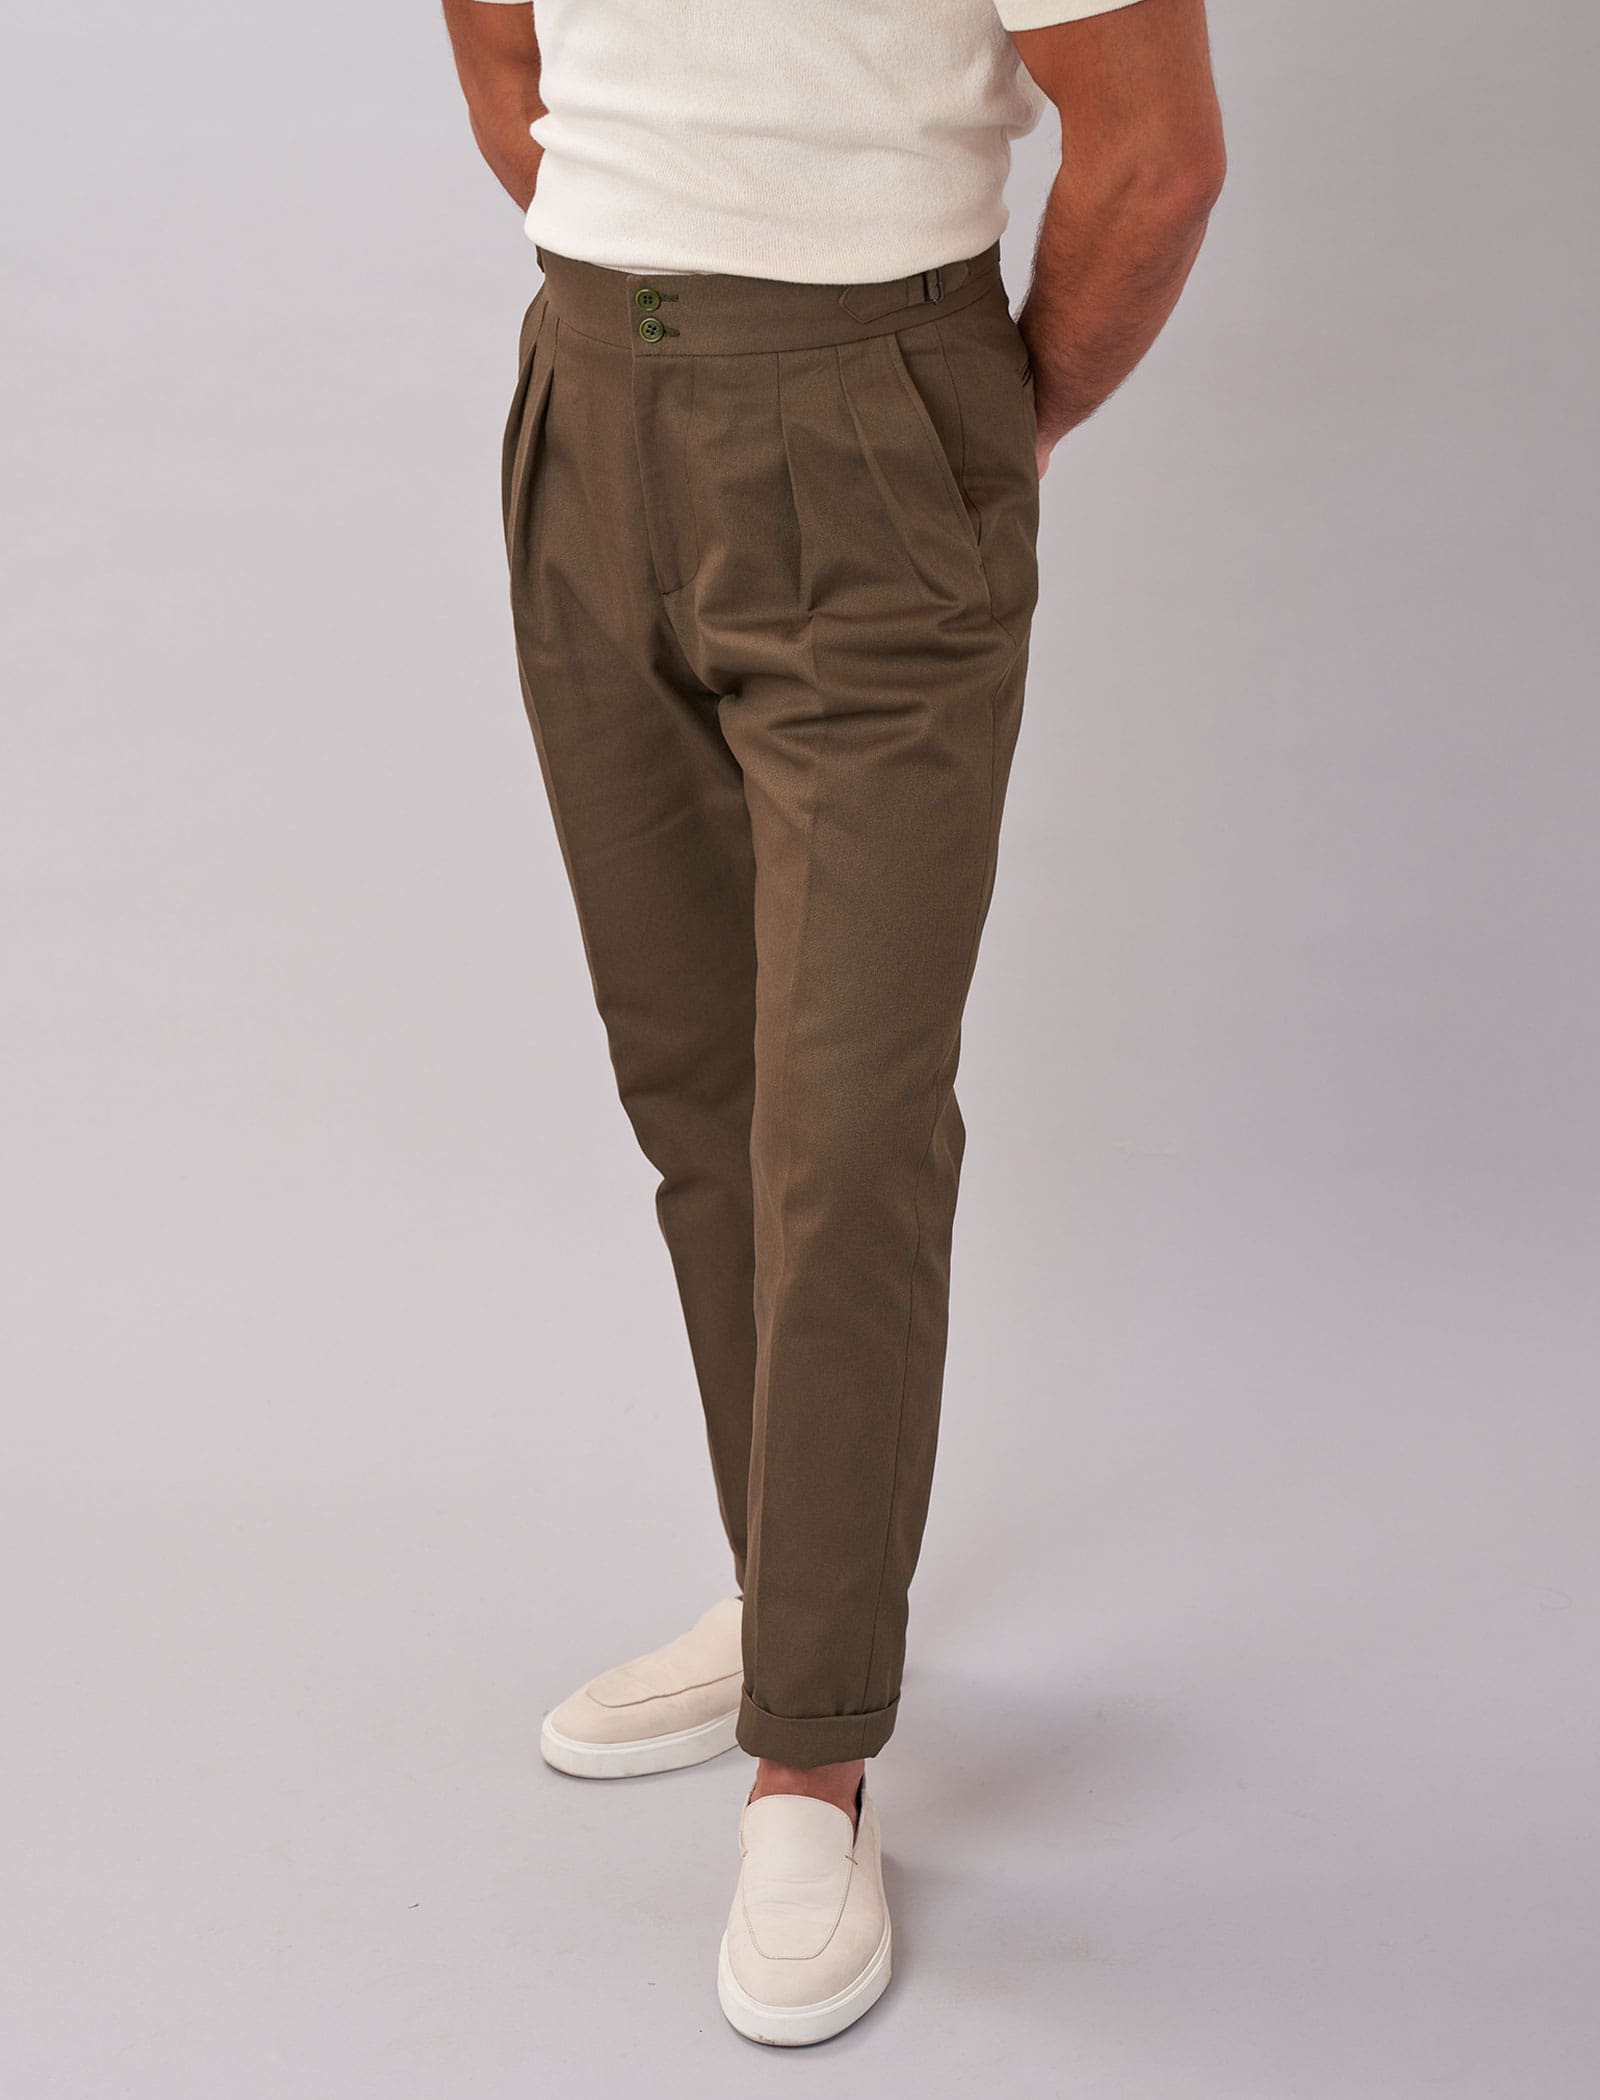 Men's Dark Olive Green Cavalry Twill Cotton High Waisted Trousers